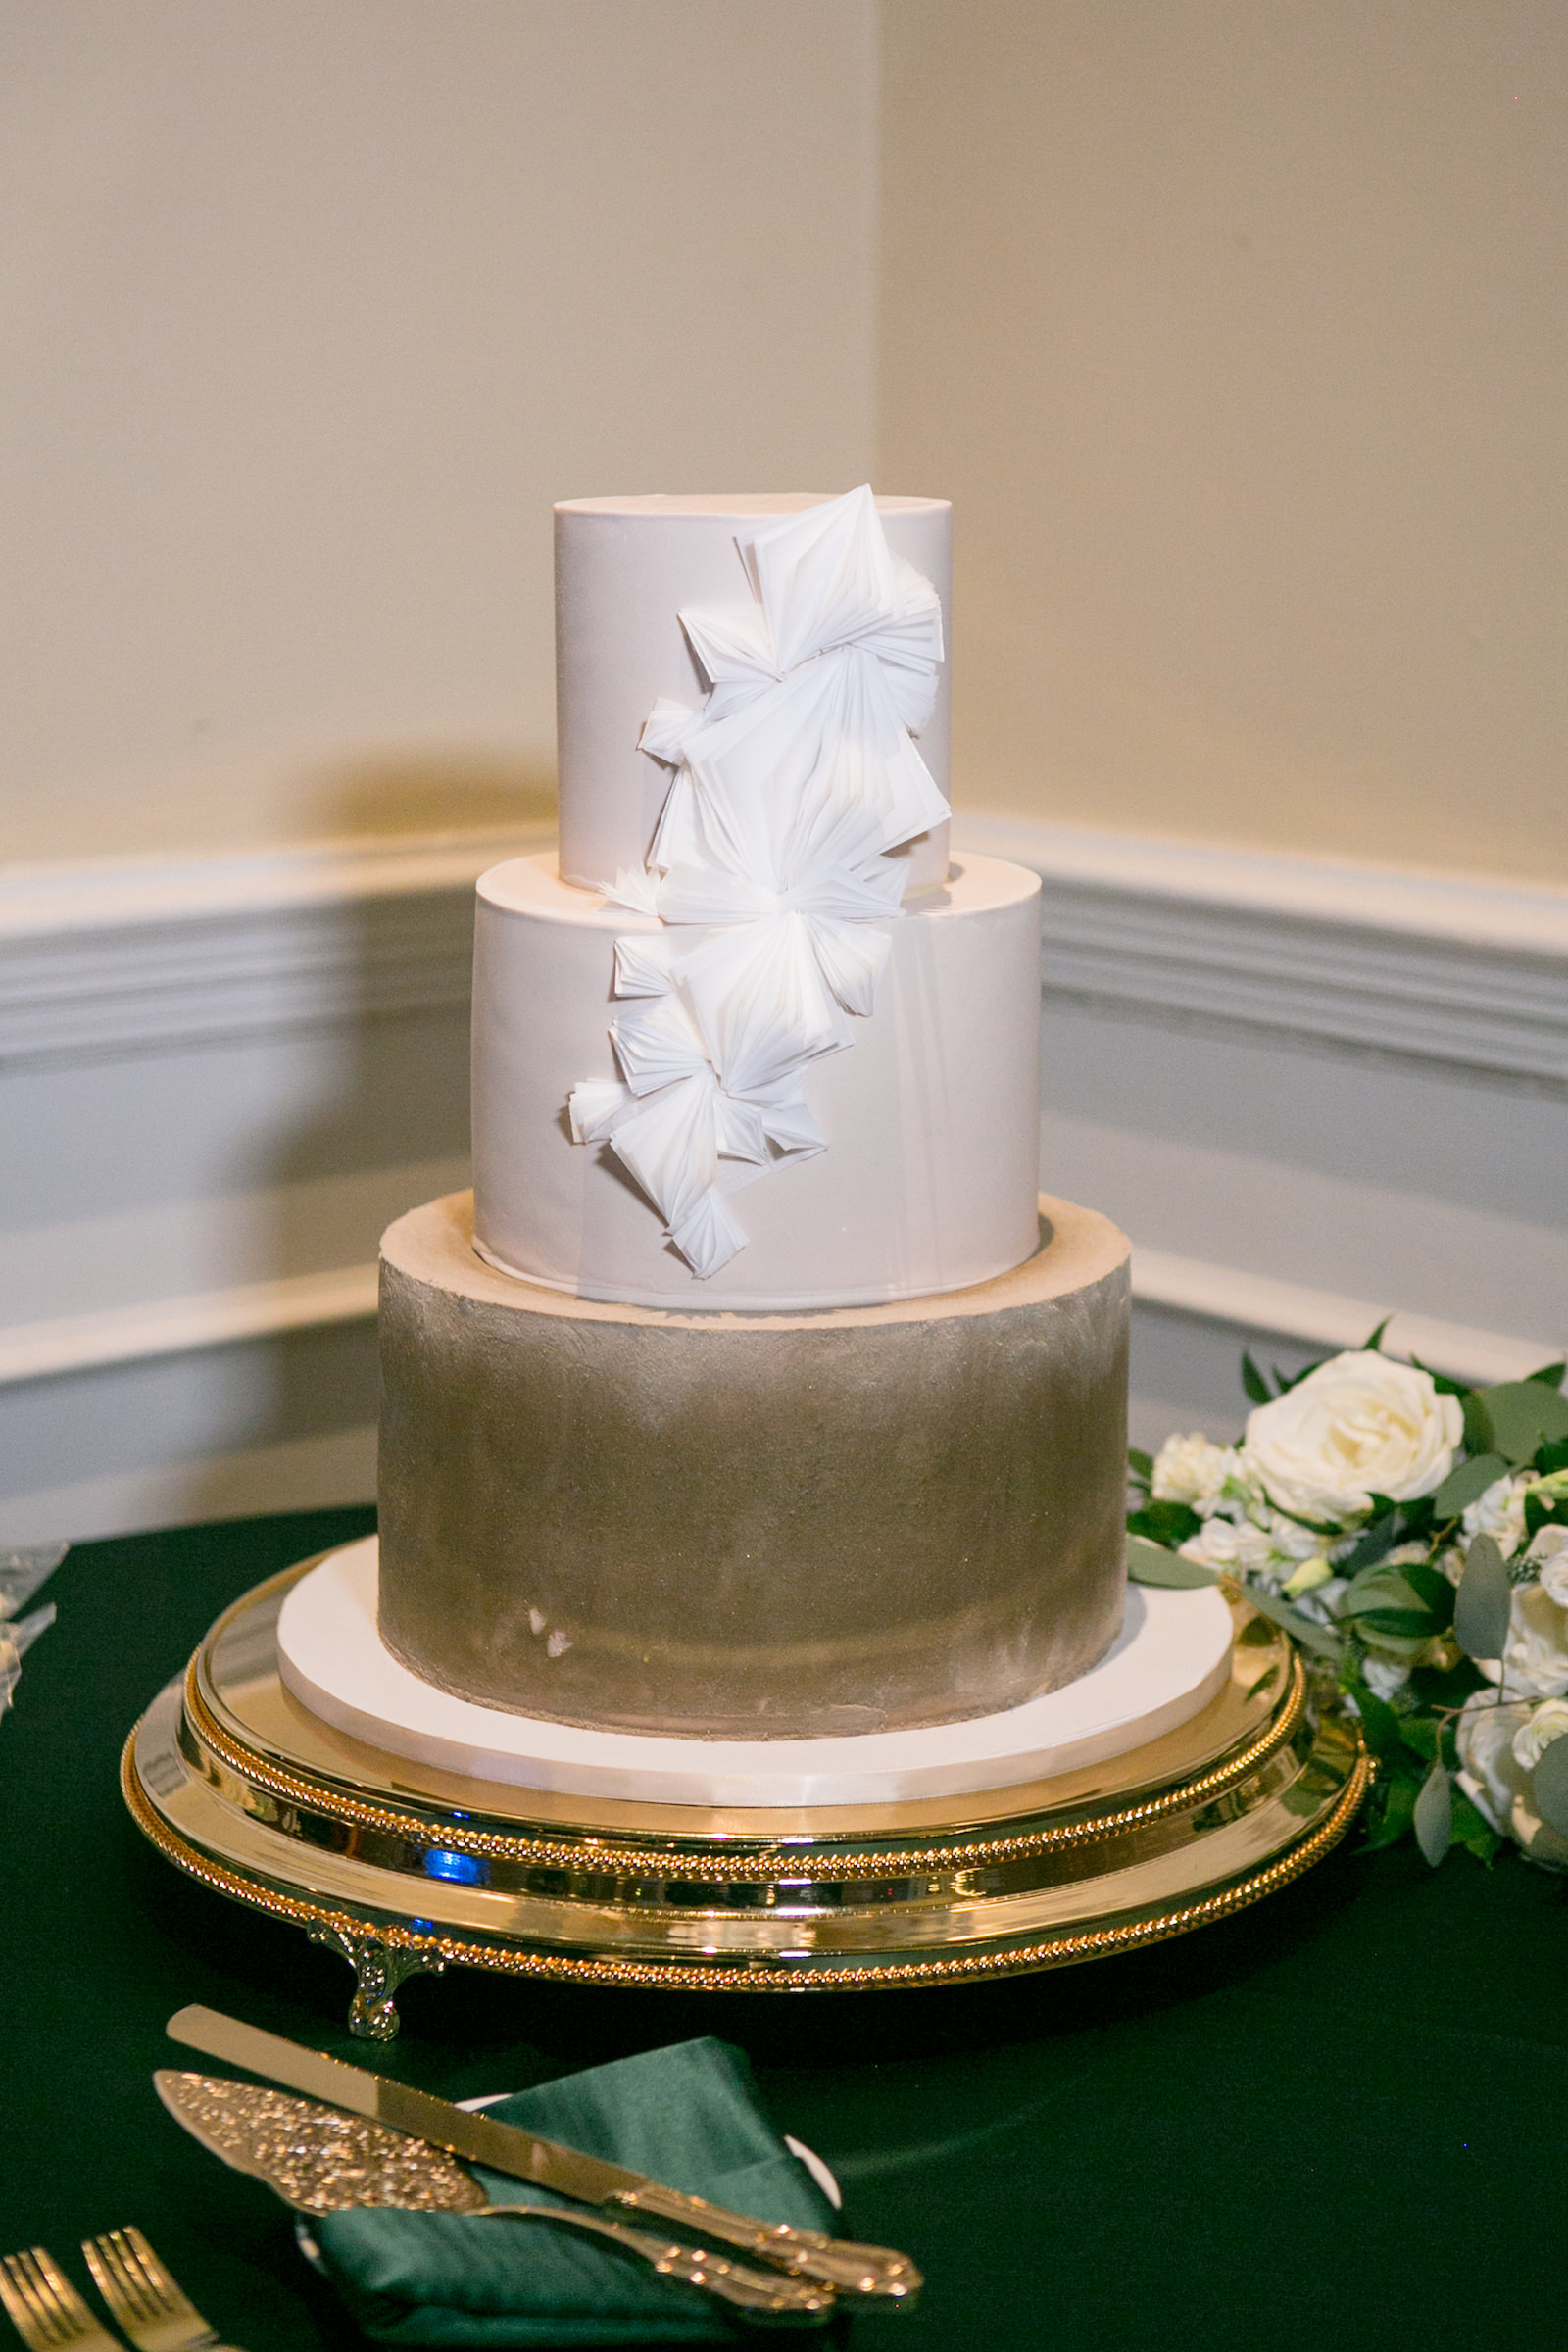 Green and Gold Wedding Reception Decor, Two Tier White and Gold Wedding Cake with White Sugar Flowers | Tampa Bay Wedding Photographer Carrie Wildes Photography